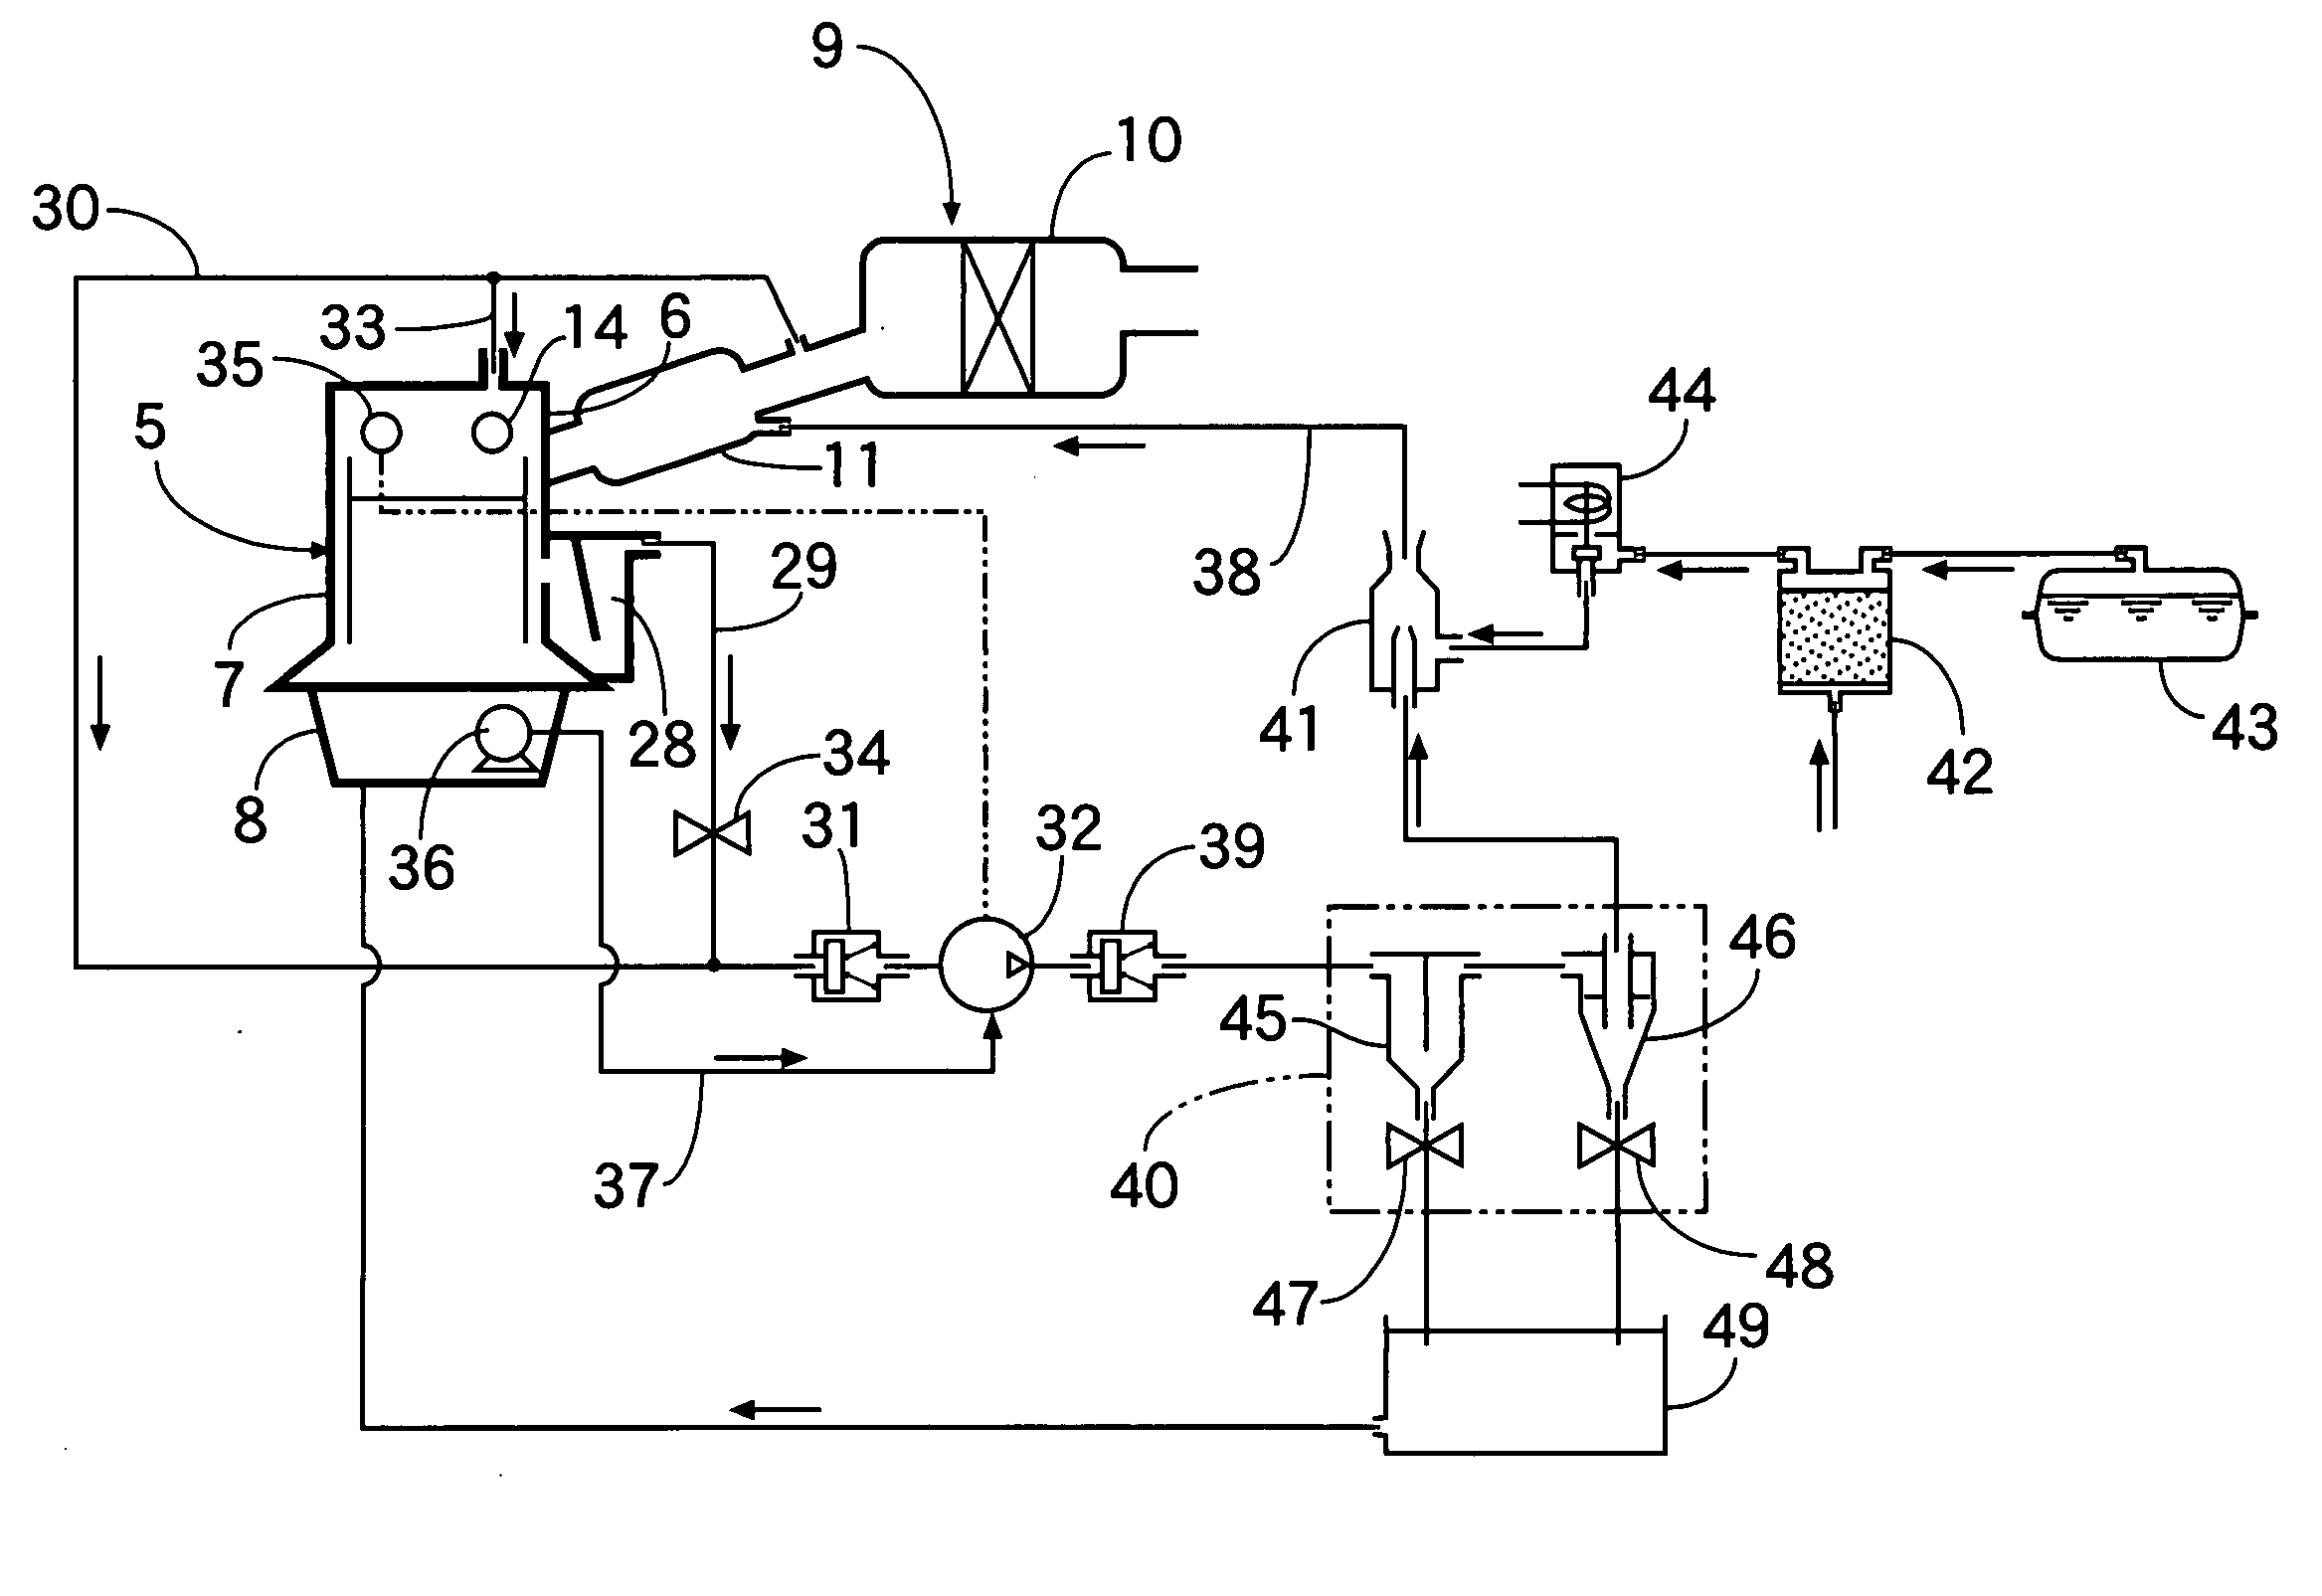 Blow-by gas and purge gas treating device in intake valve lift variable engine